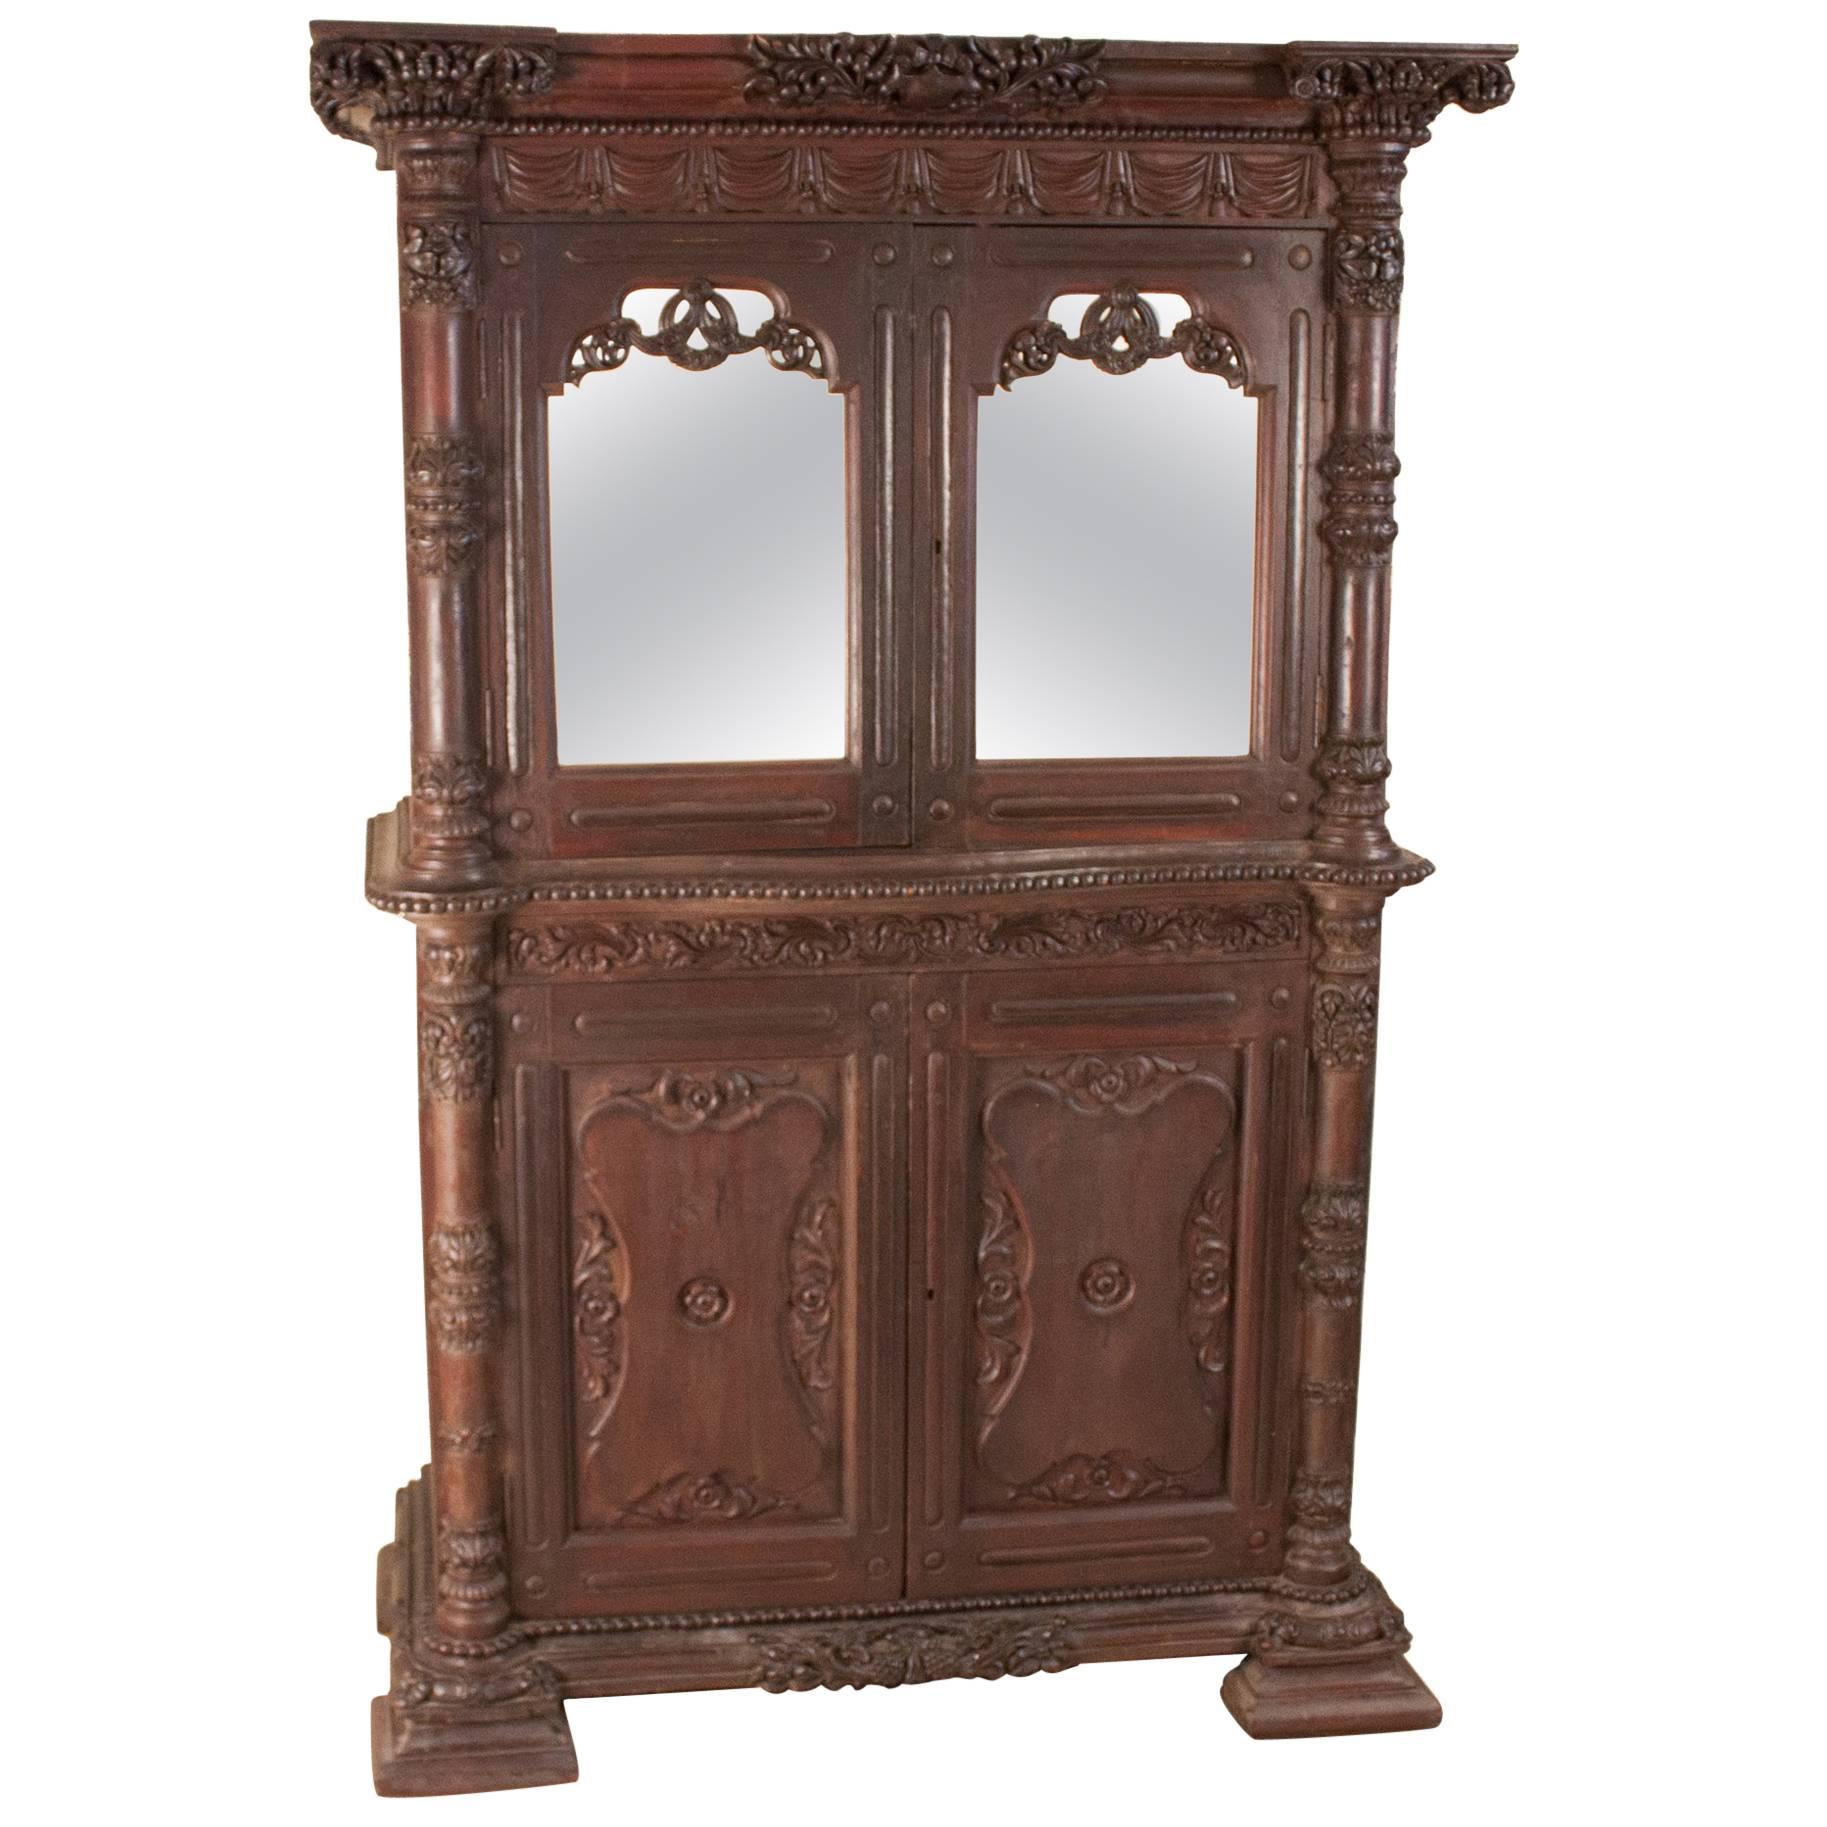 19th Century British Colonial Teak Wood Mirrored Cabinet or Hutch For Sale